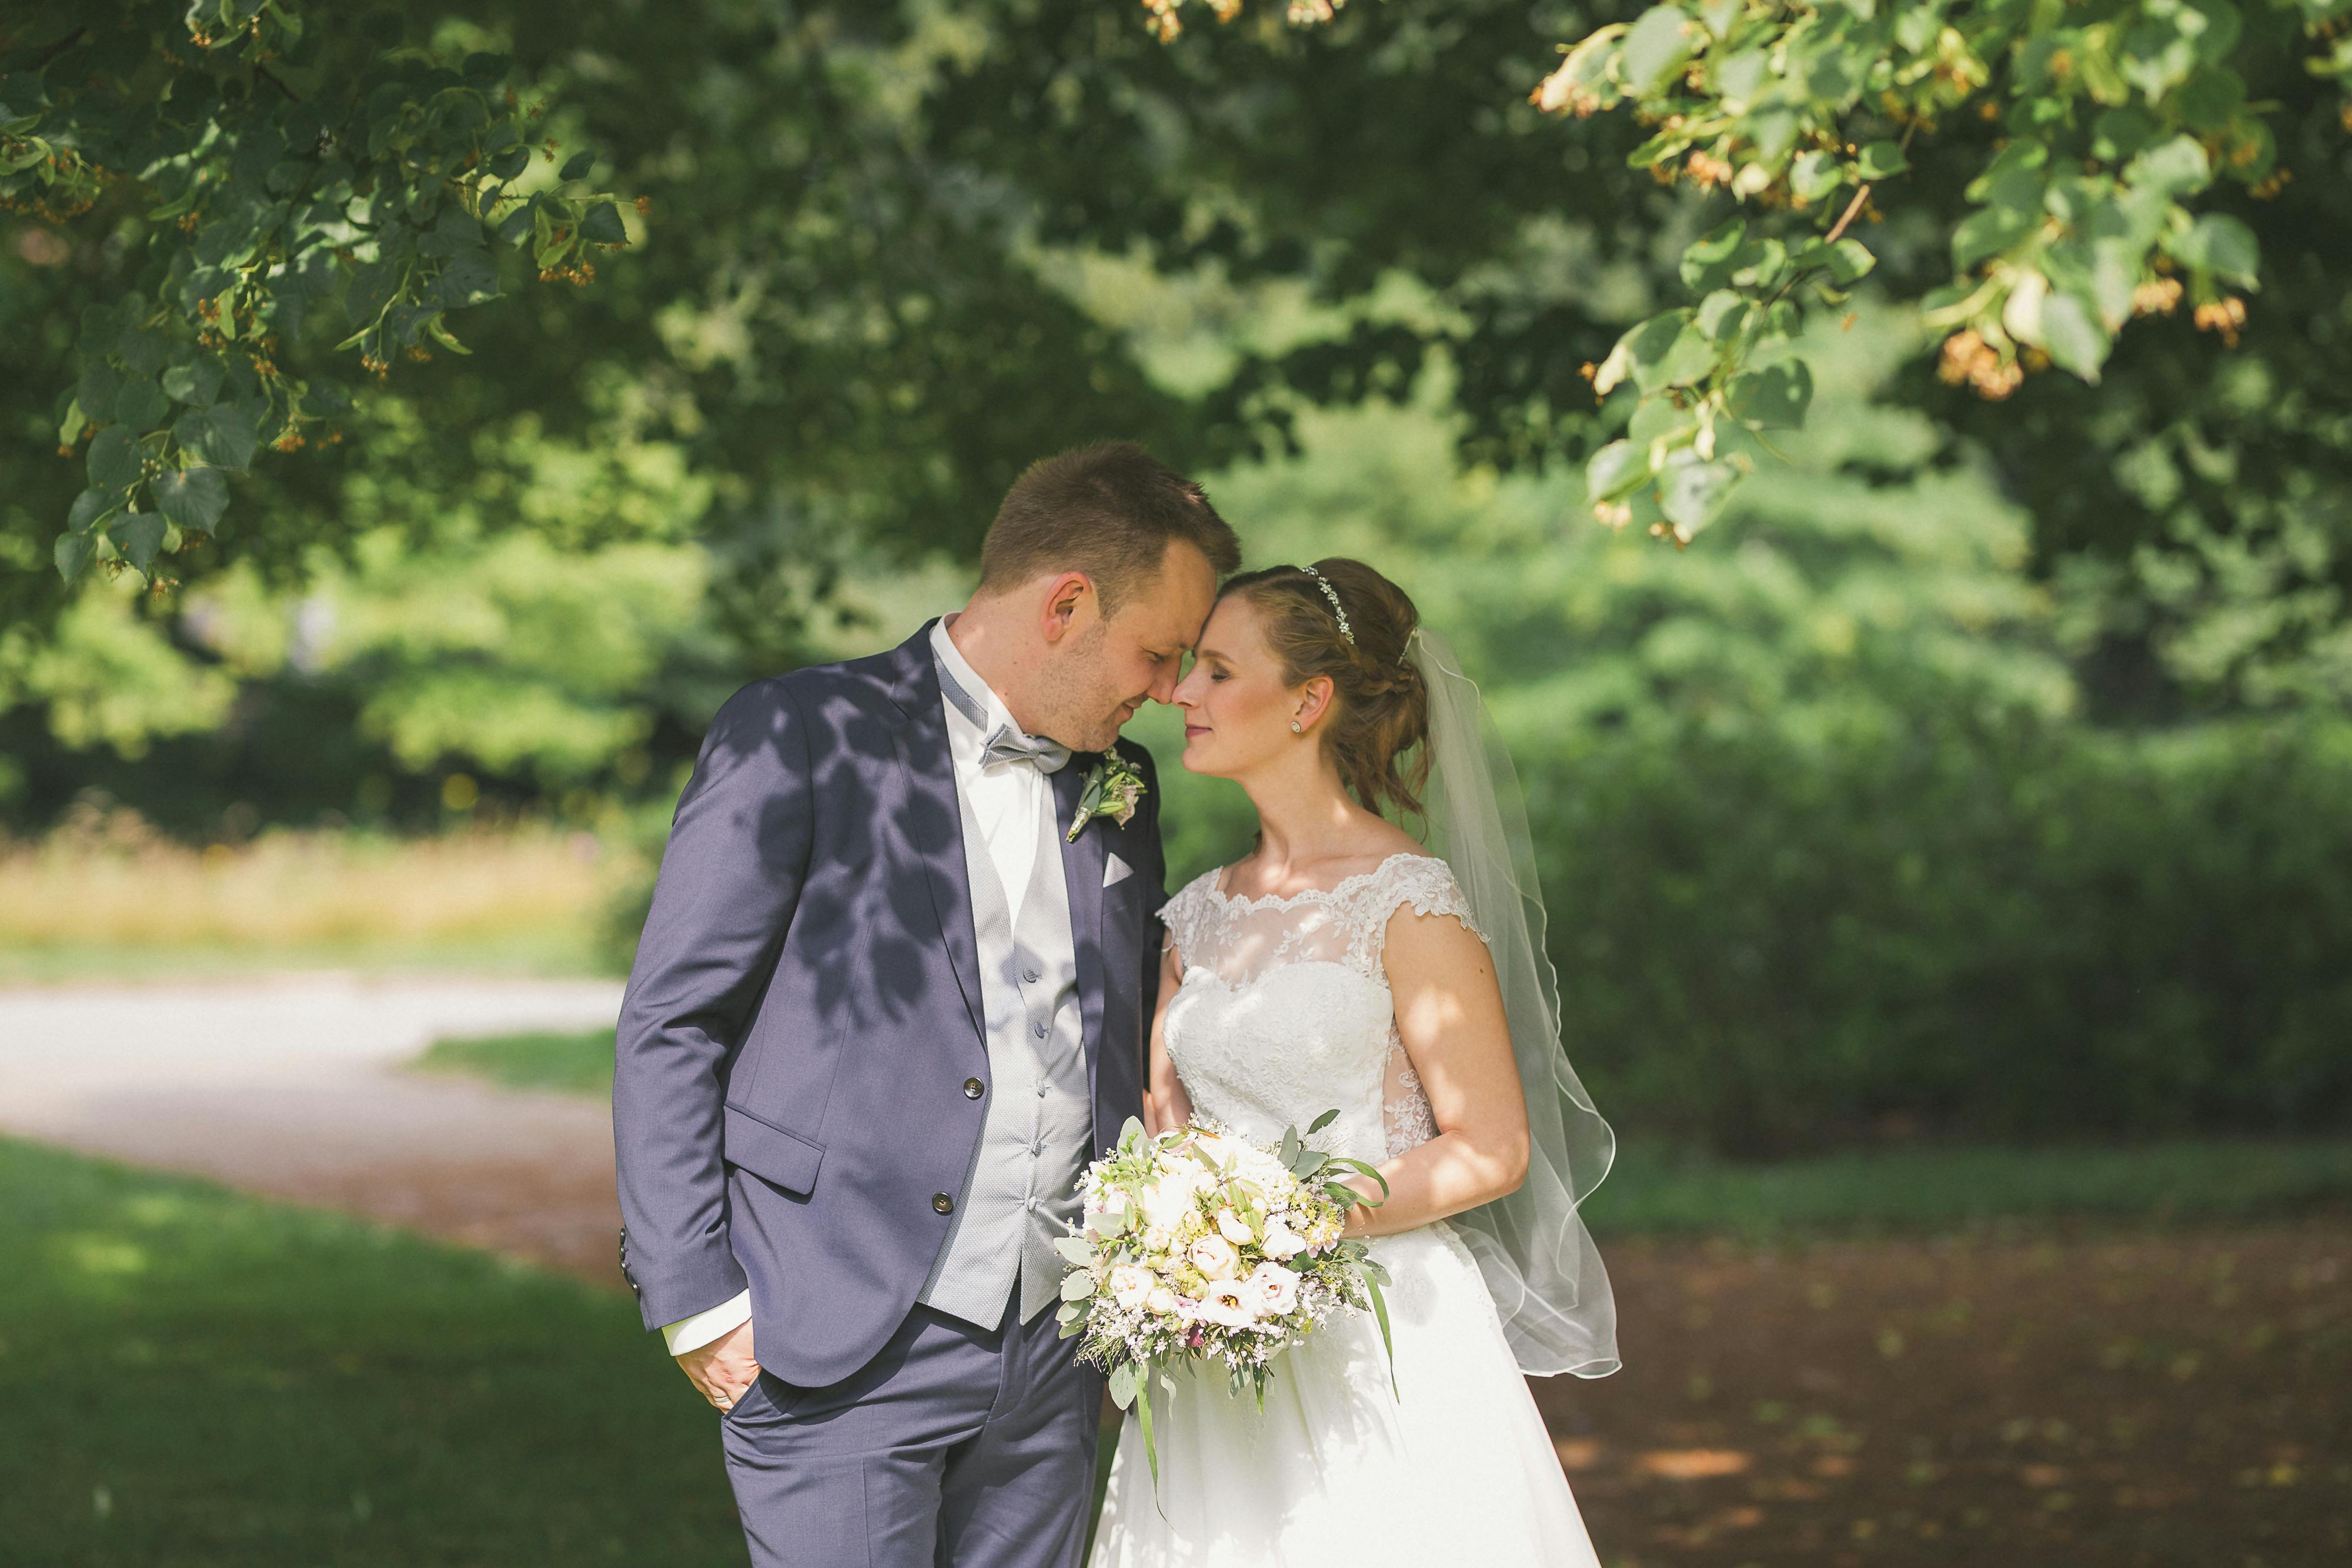 A bride and groom in a park | Source: Pexels